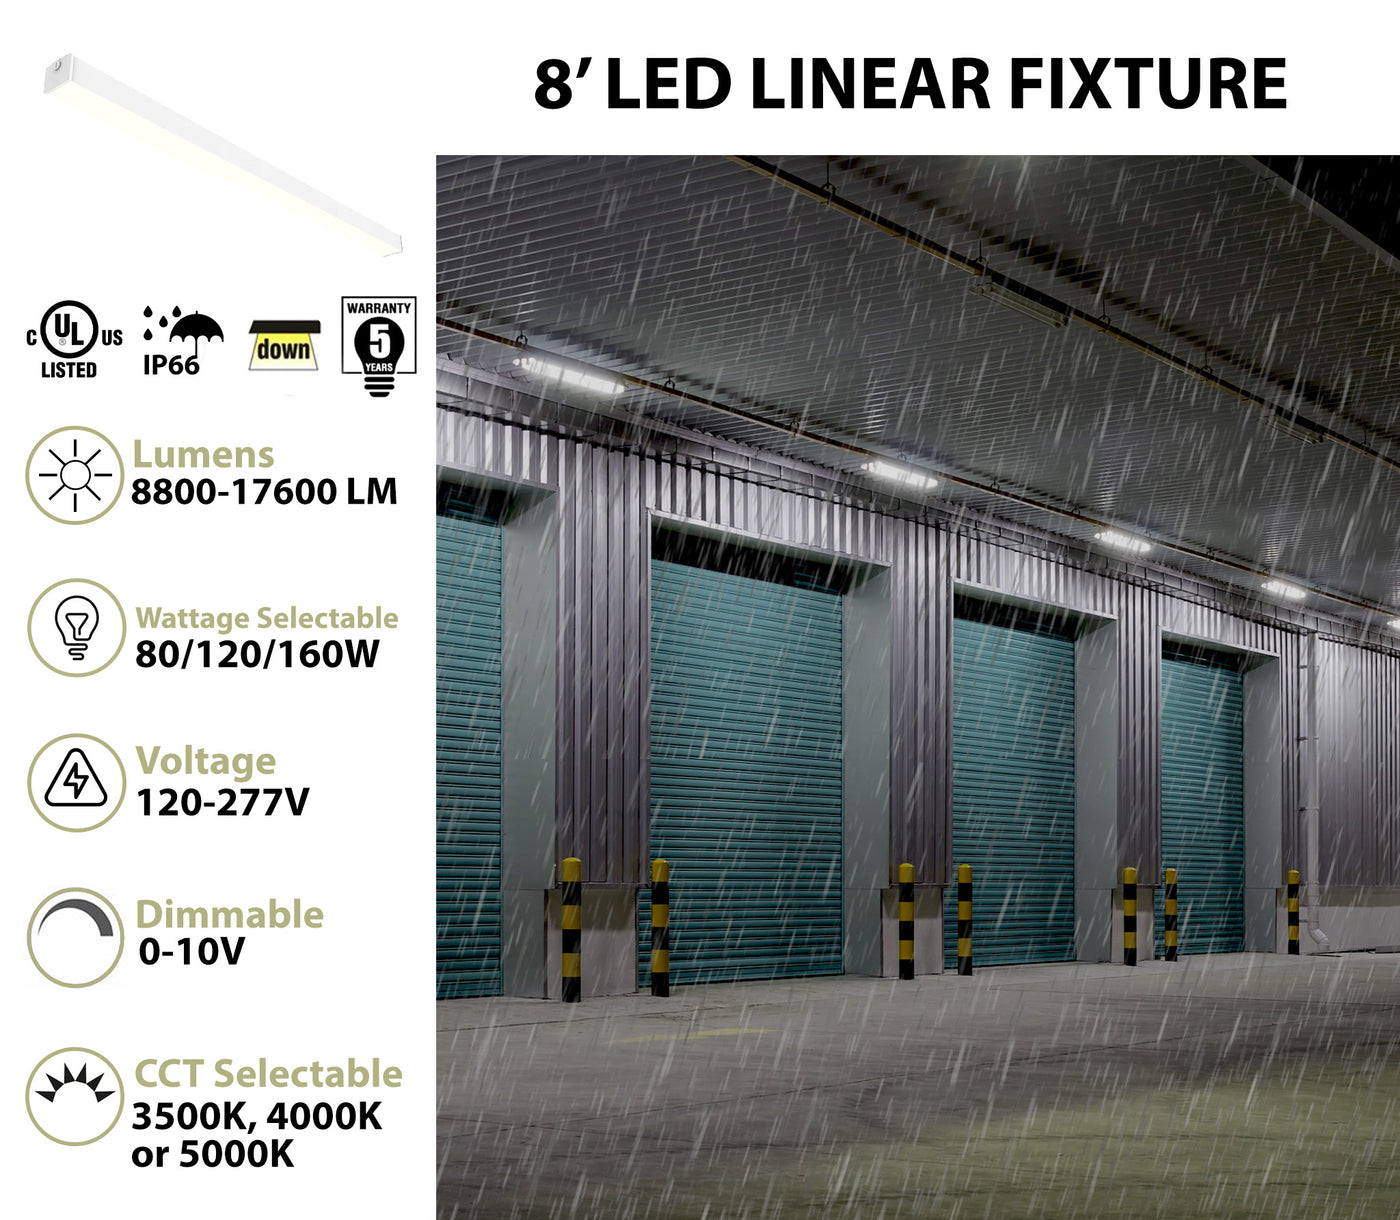 8 FT LED Linear Fixture, IP66 Rated, 17,600 Lumen Max, Wattage and CCT Selectable, Surface Mounted, 120-277V